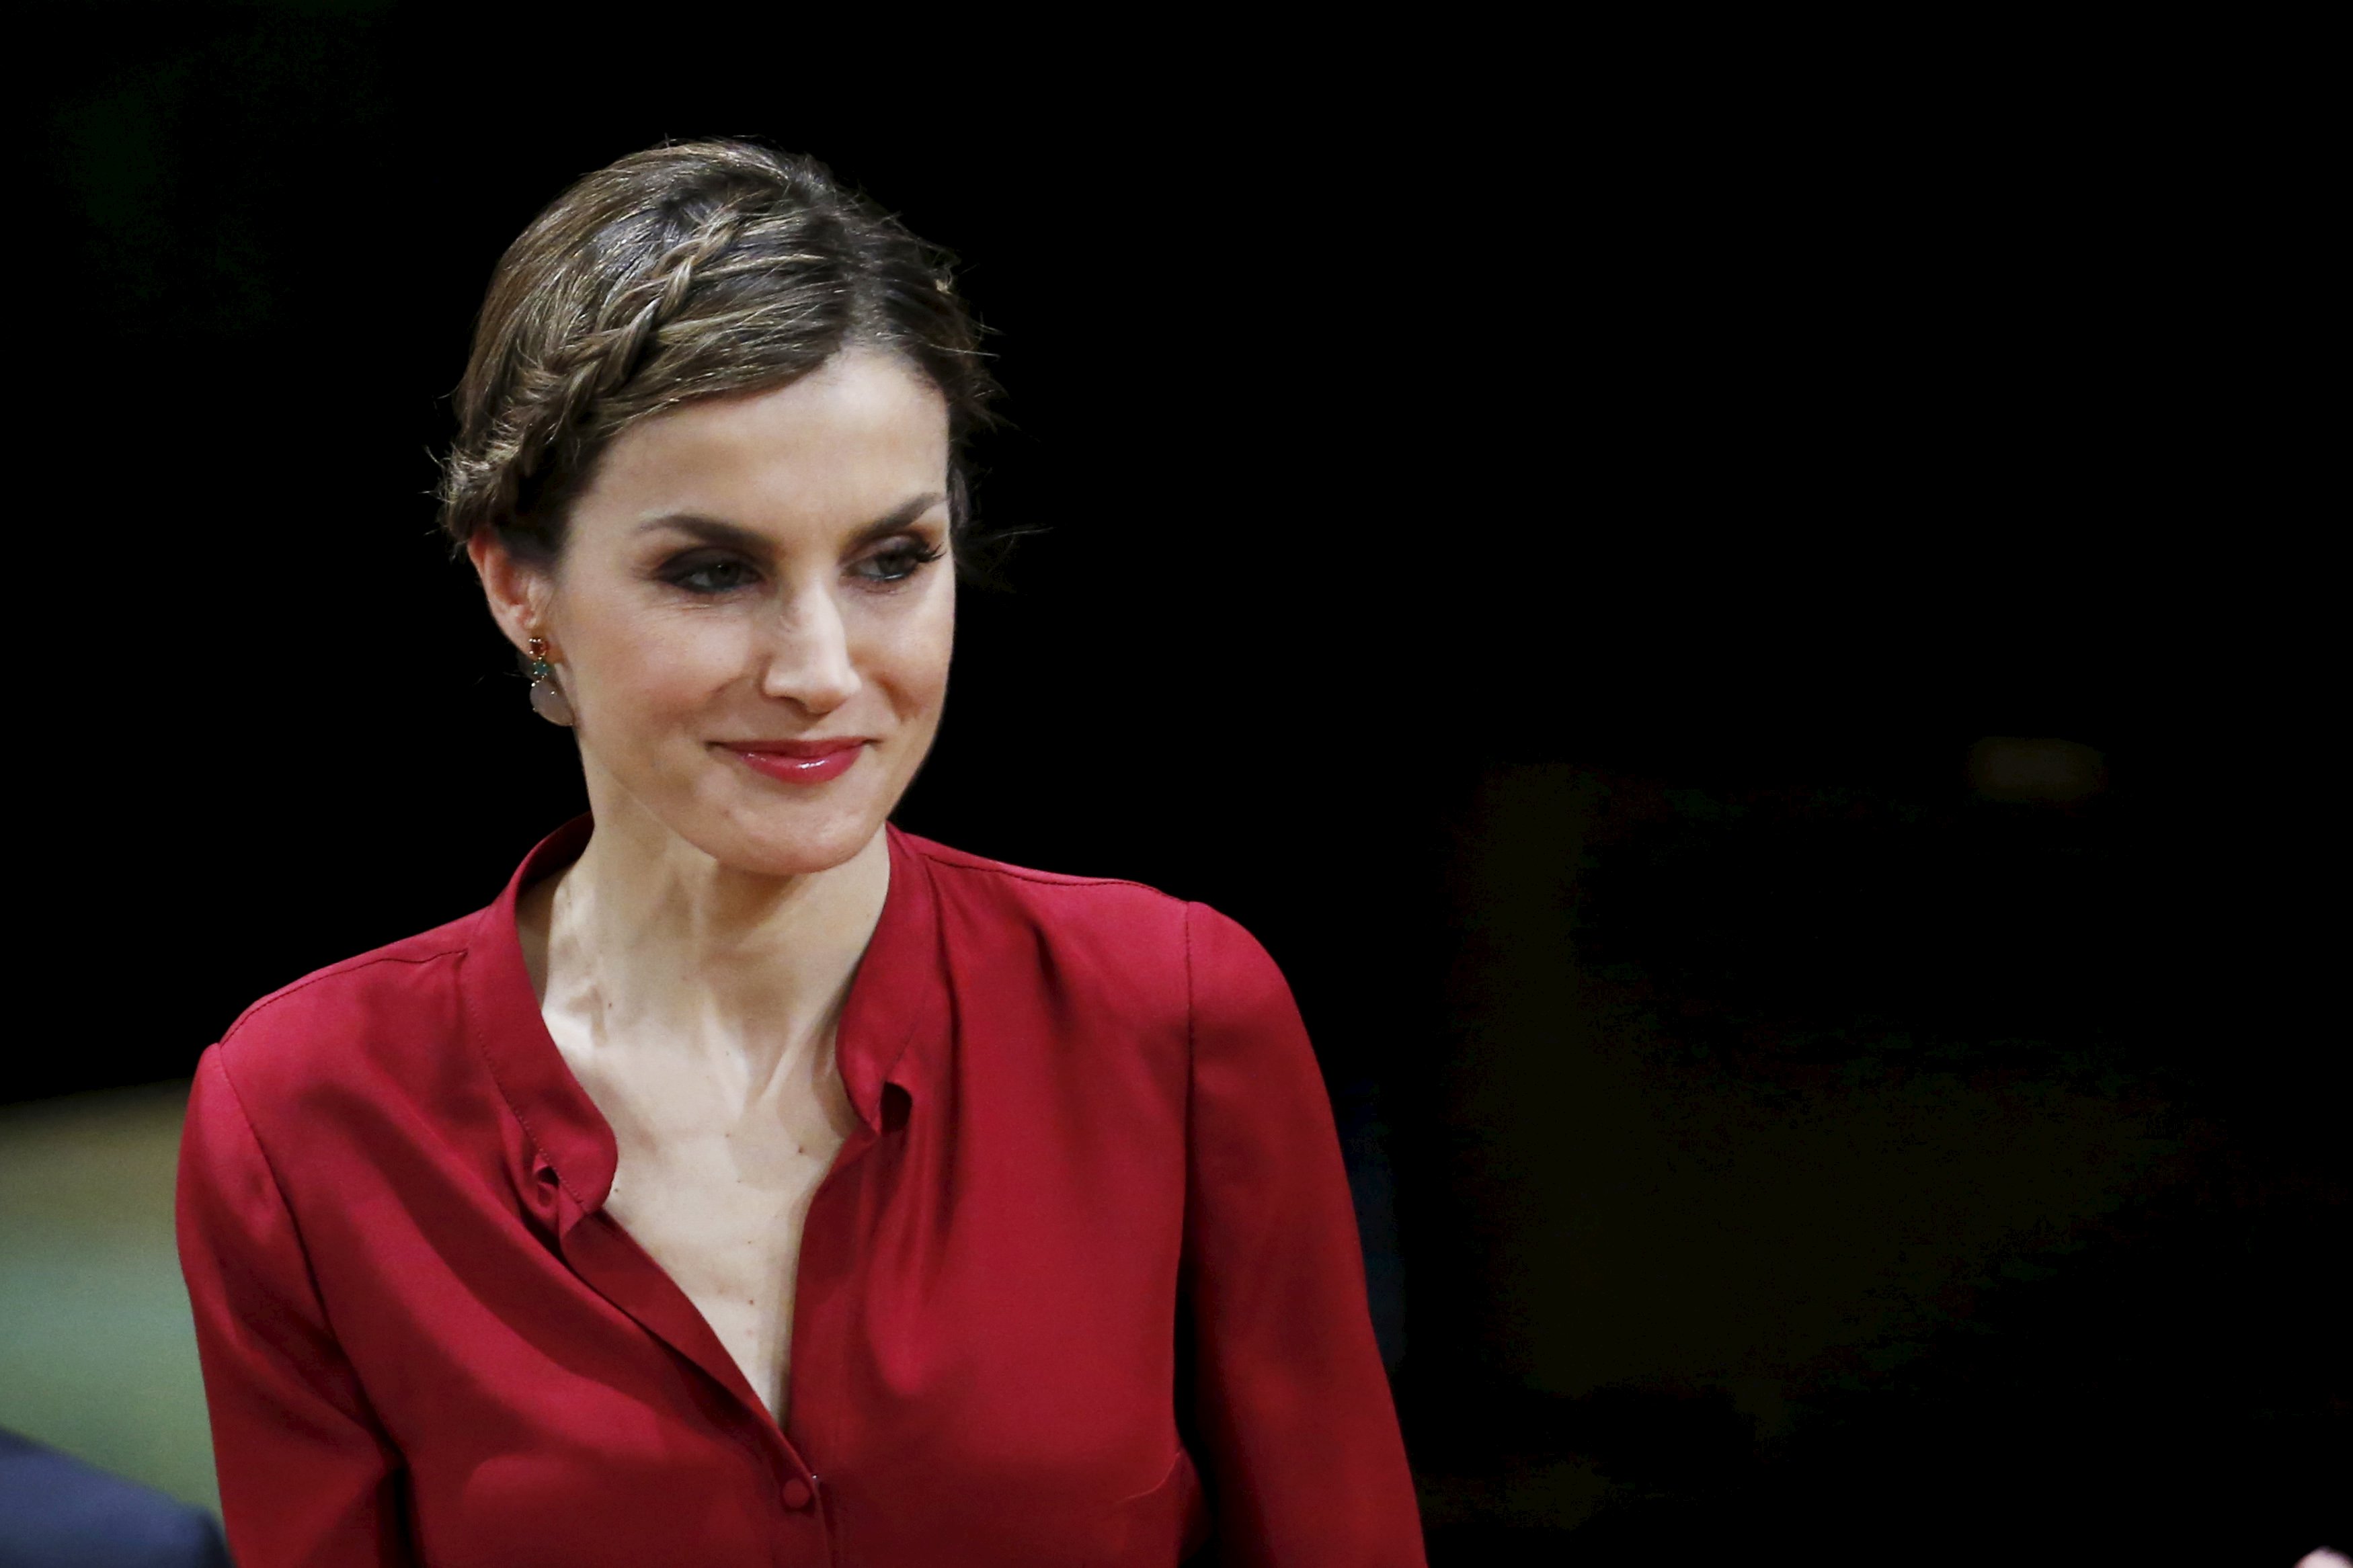 Spain's Queen Letizia smiles during the signing of a cooperation agreement between  National Autonomous University of Mexico (UNAM),  Cervantes Institute and  University of Salamanca in Mexico City, June 30, 2015. REUTERS/Edgard Garrido